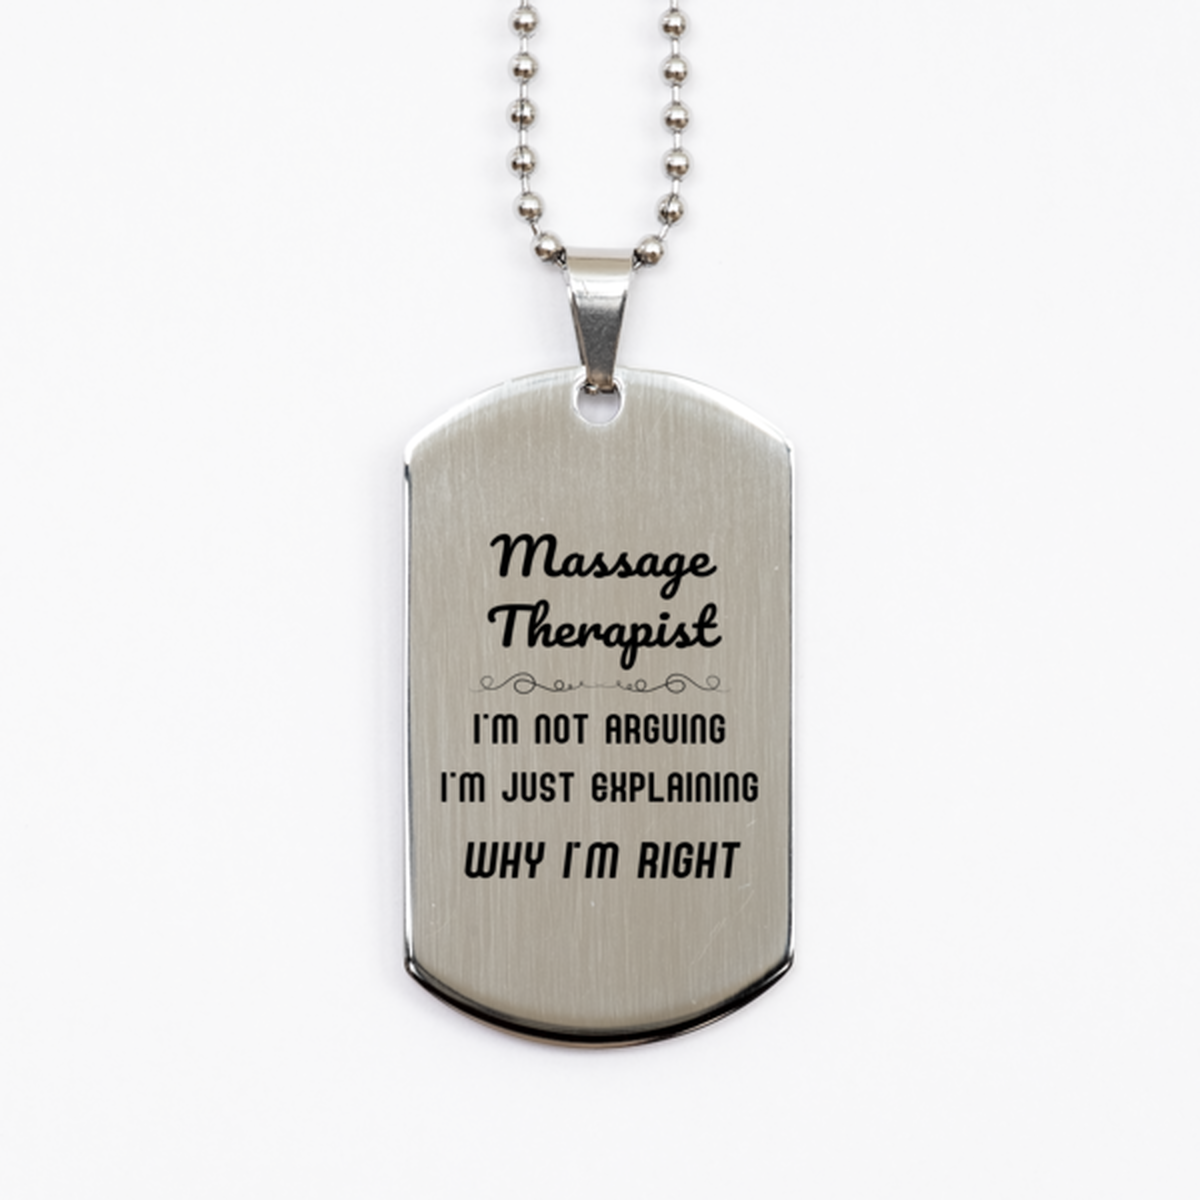 Massage Therapist I'm not Arguing. I'm Just Explaining Why I'm RIGHT Silver Dog Tag, Funny Saying Quote Massage Therapist Gifts For Massage Therapist Graduation Birthday Christmas Gifts for Men Women Coworker